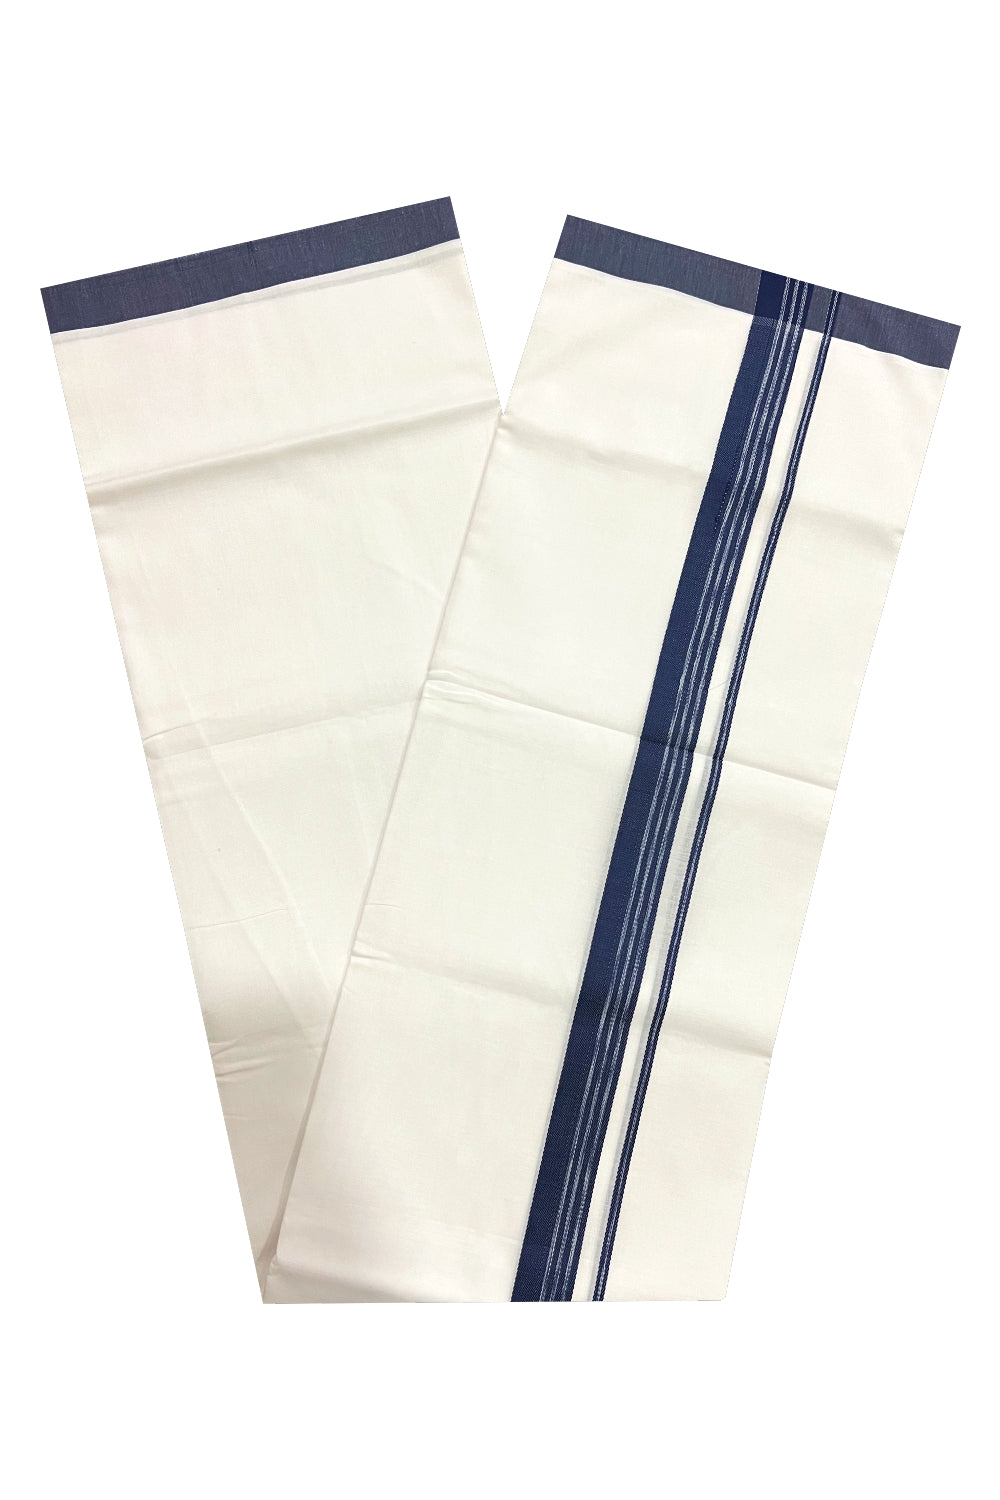 Pure White Cotton Double Mundu with Navy Blue Border (South Indian Dhoti)